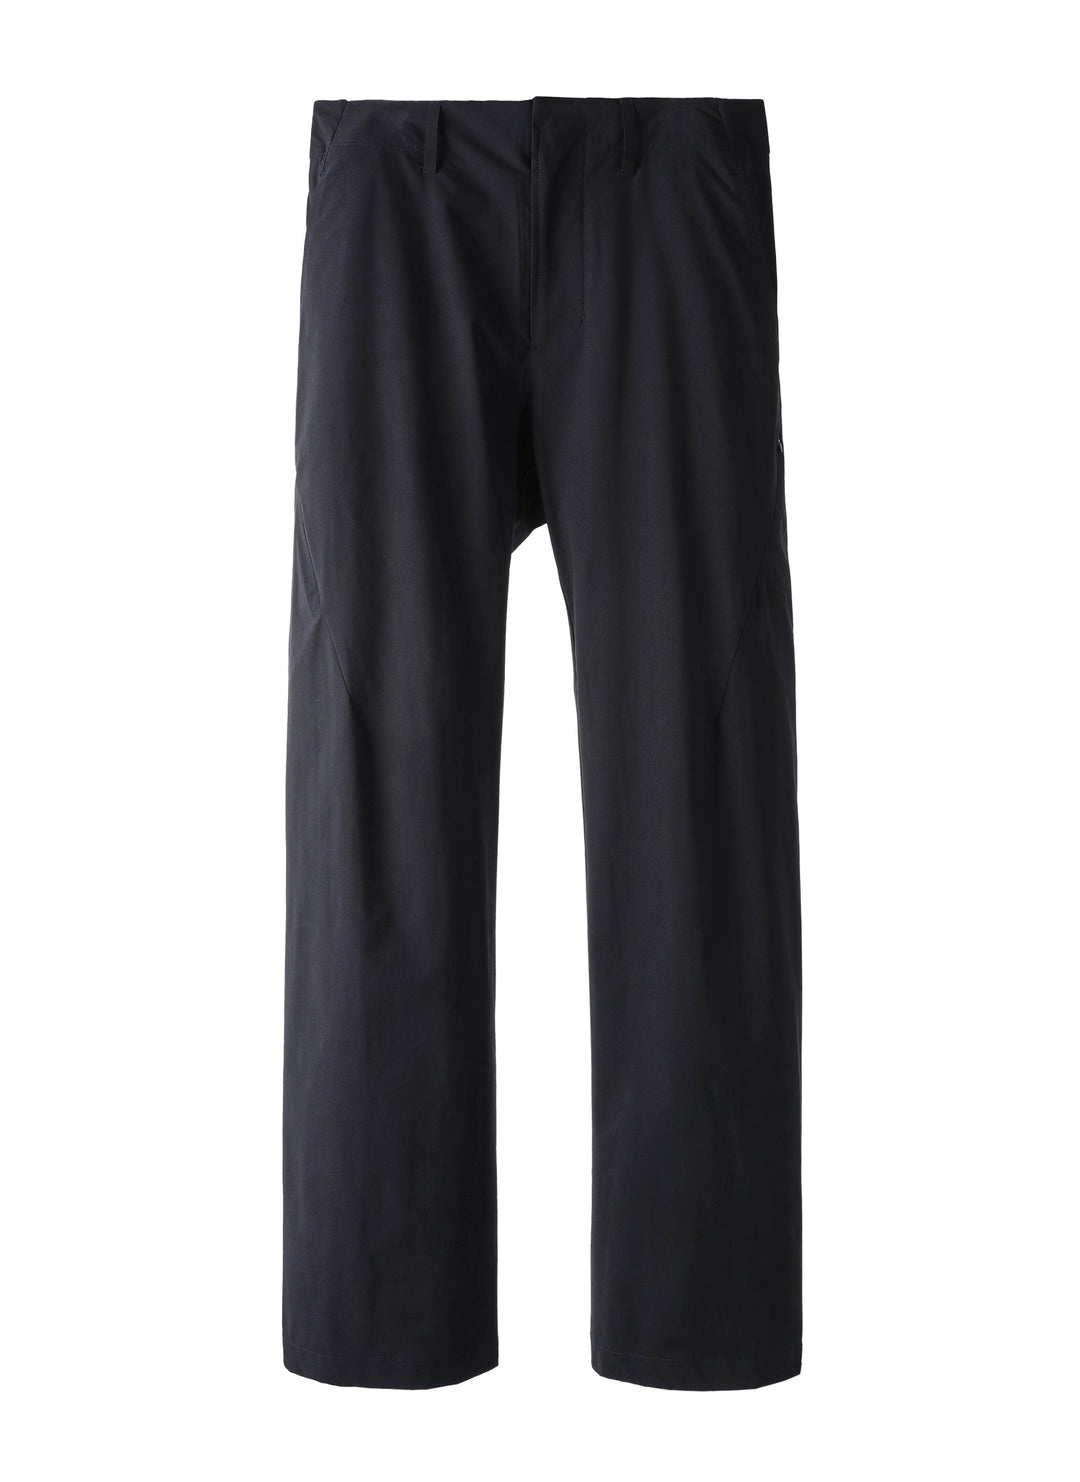 6.0 Technical Pants Right - 1